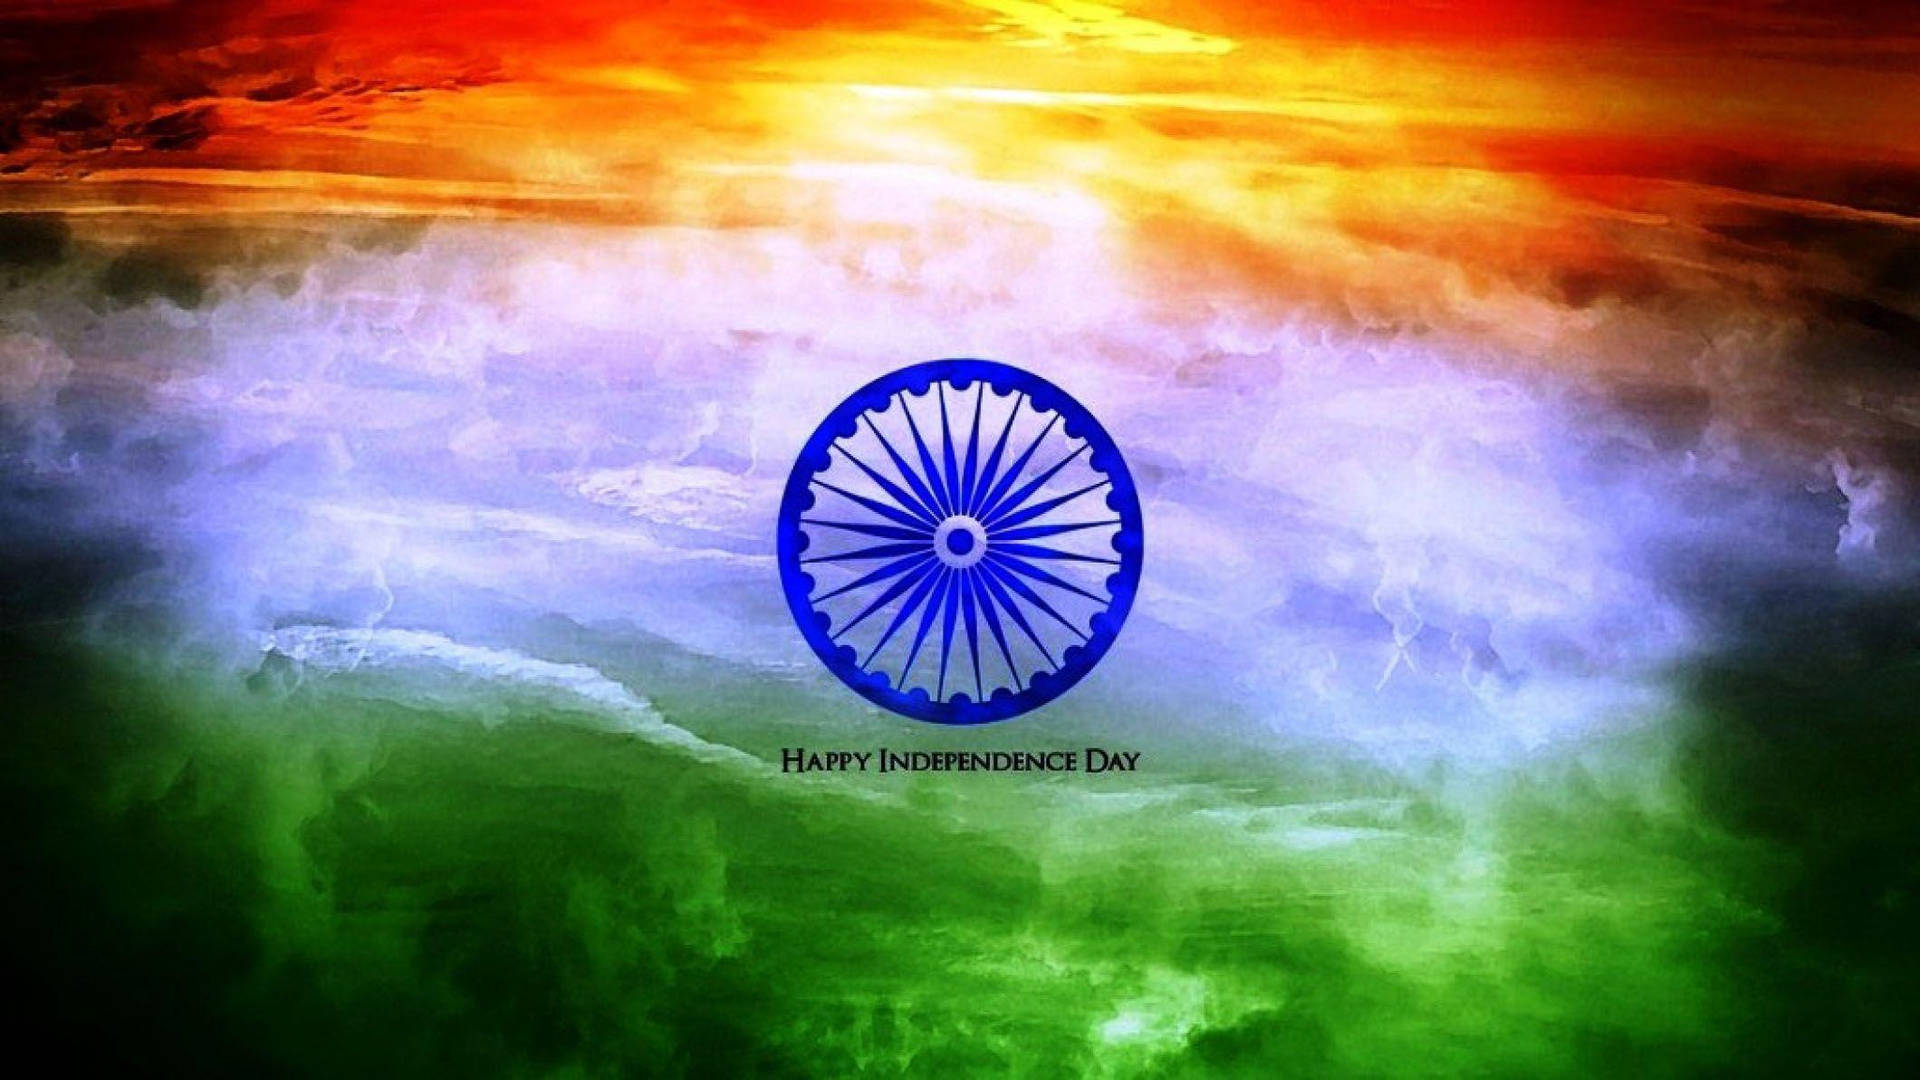 Download Indian Flag Hd Against Abstract Background Wallpaper | Wallpapers .com